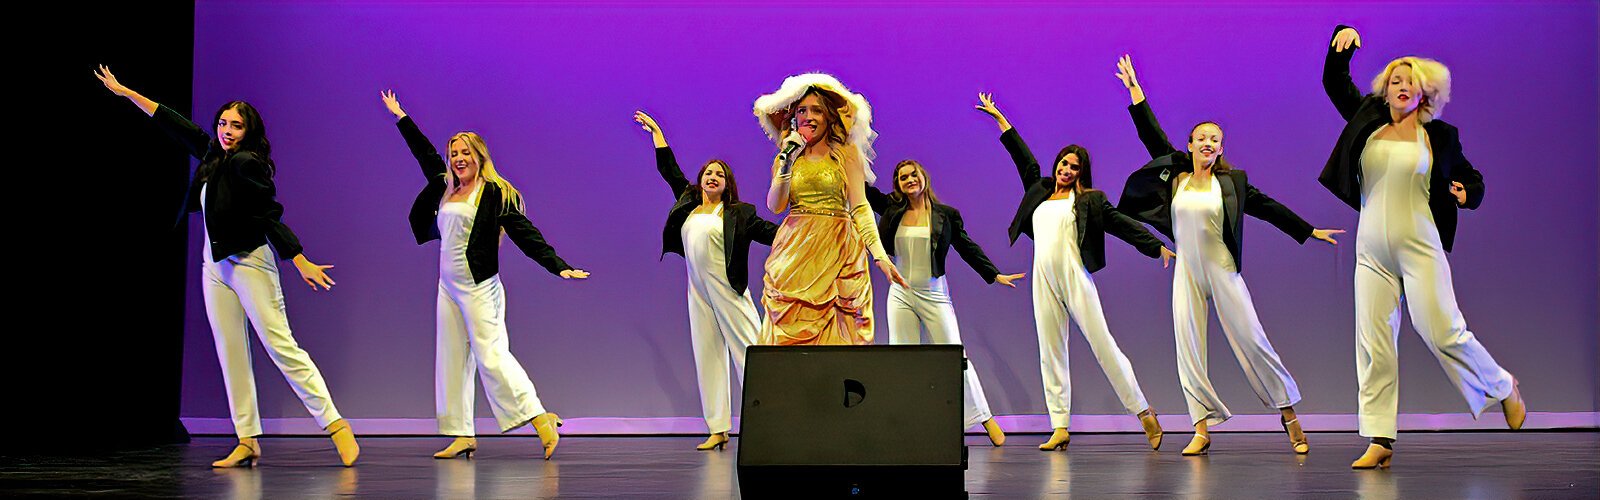 The Entertainment Revue was one of the outstanding Tampa Bay artistic ensembles showcased during the New Tampa Performing Arts Center's inaugural Fall Festival.